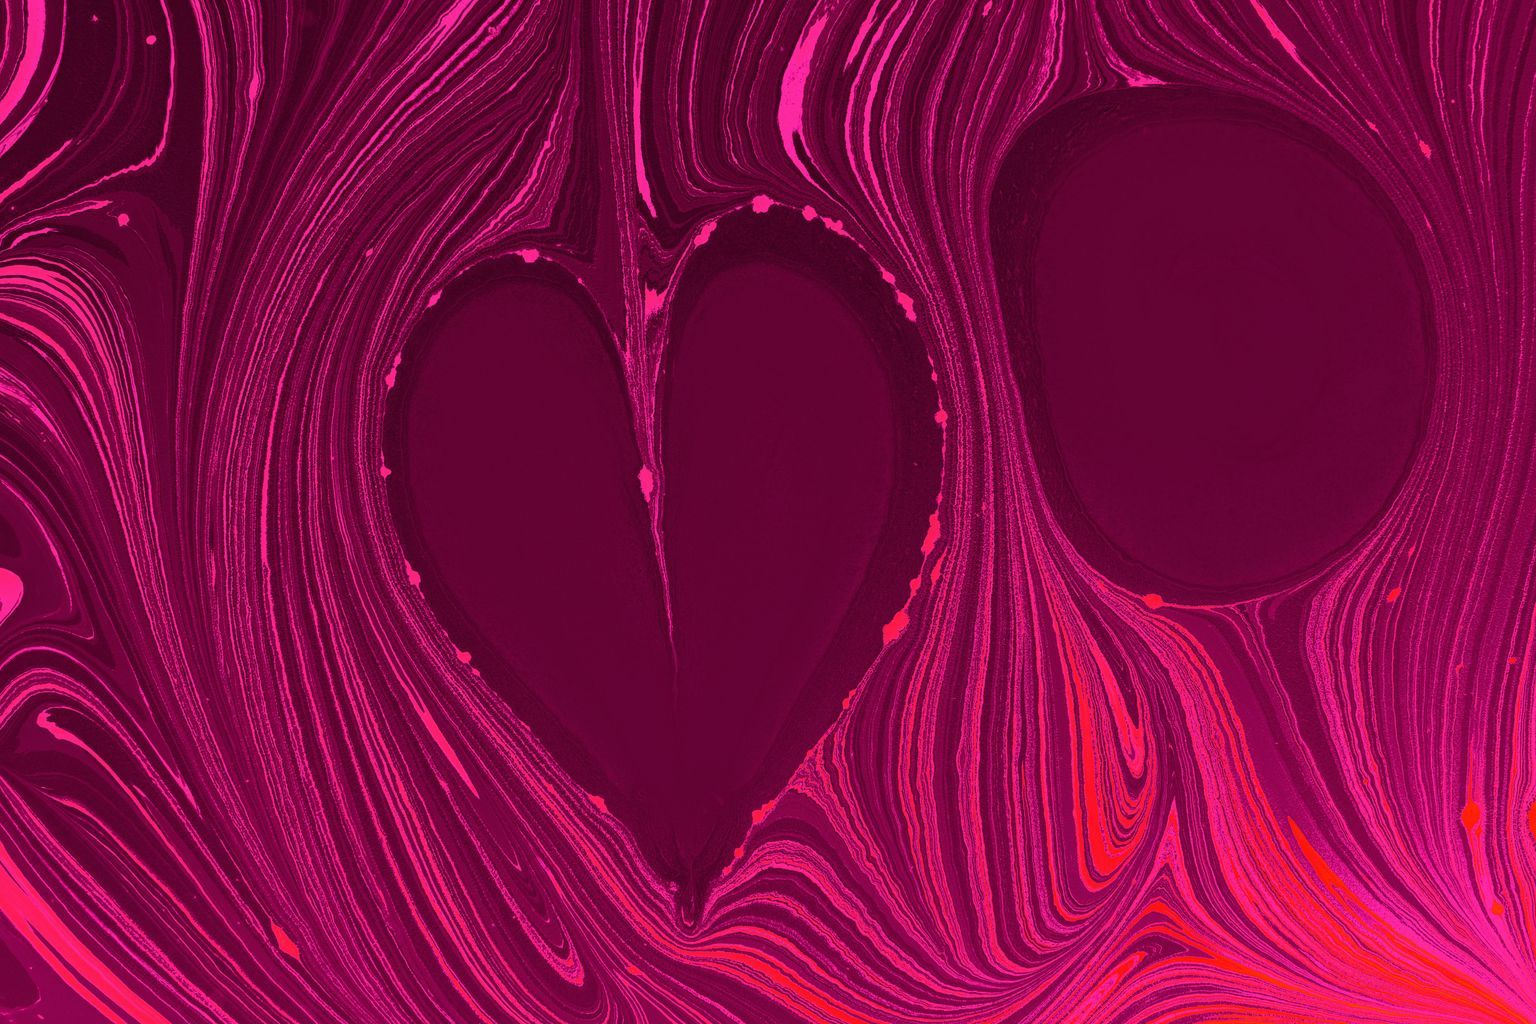 A pink and purple heart shaped design on a purple background